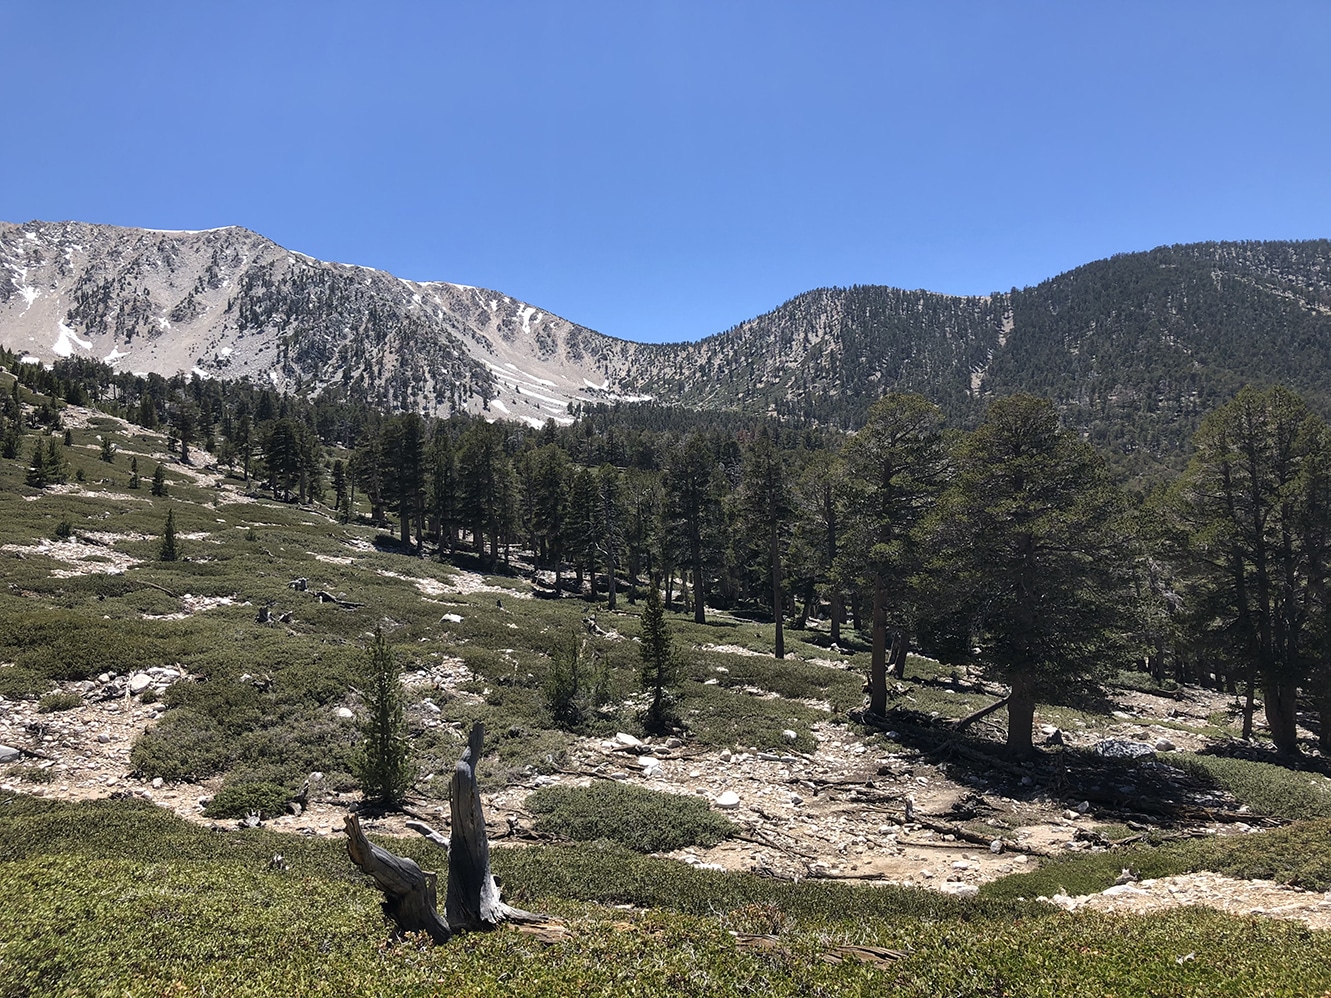 The view over Mt. San Gorgonio on the hike up to the summit.